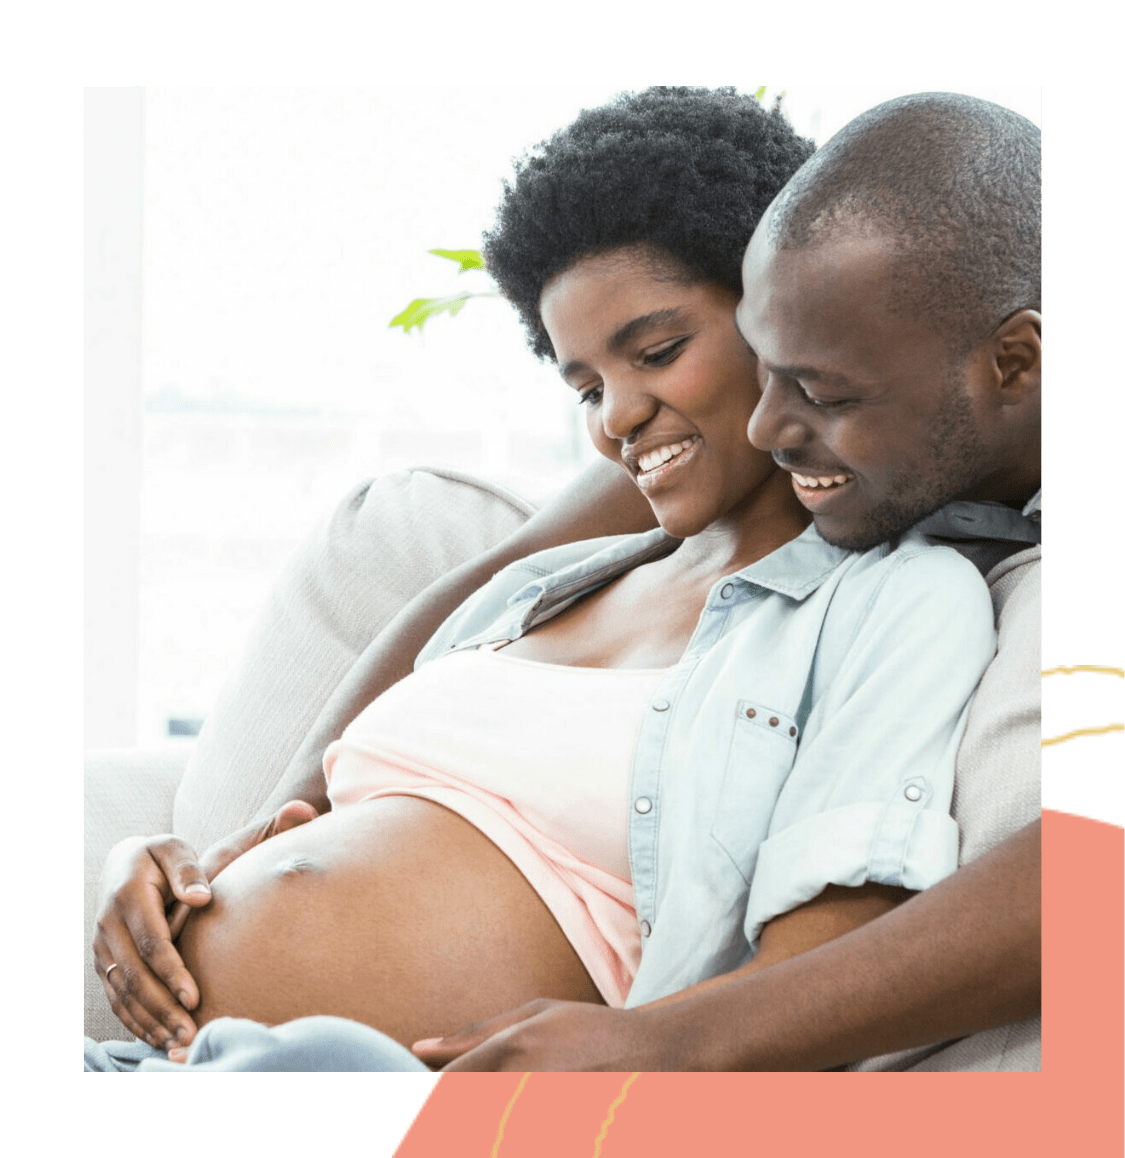 Pregnant couple with background